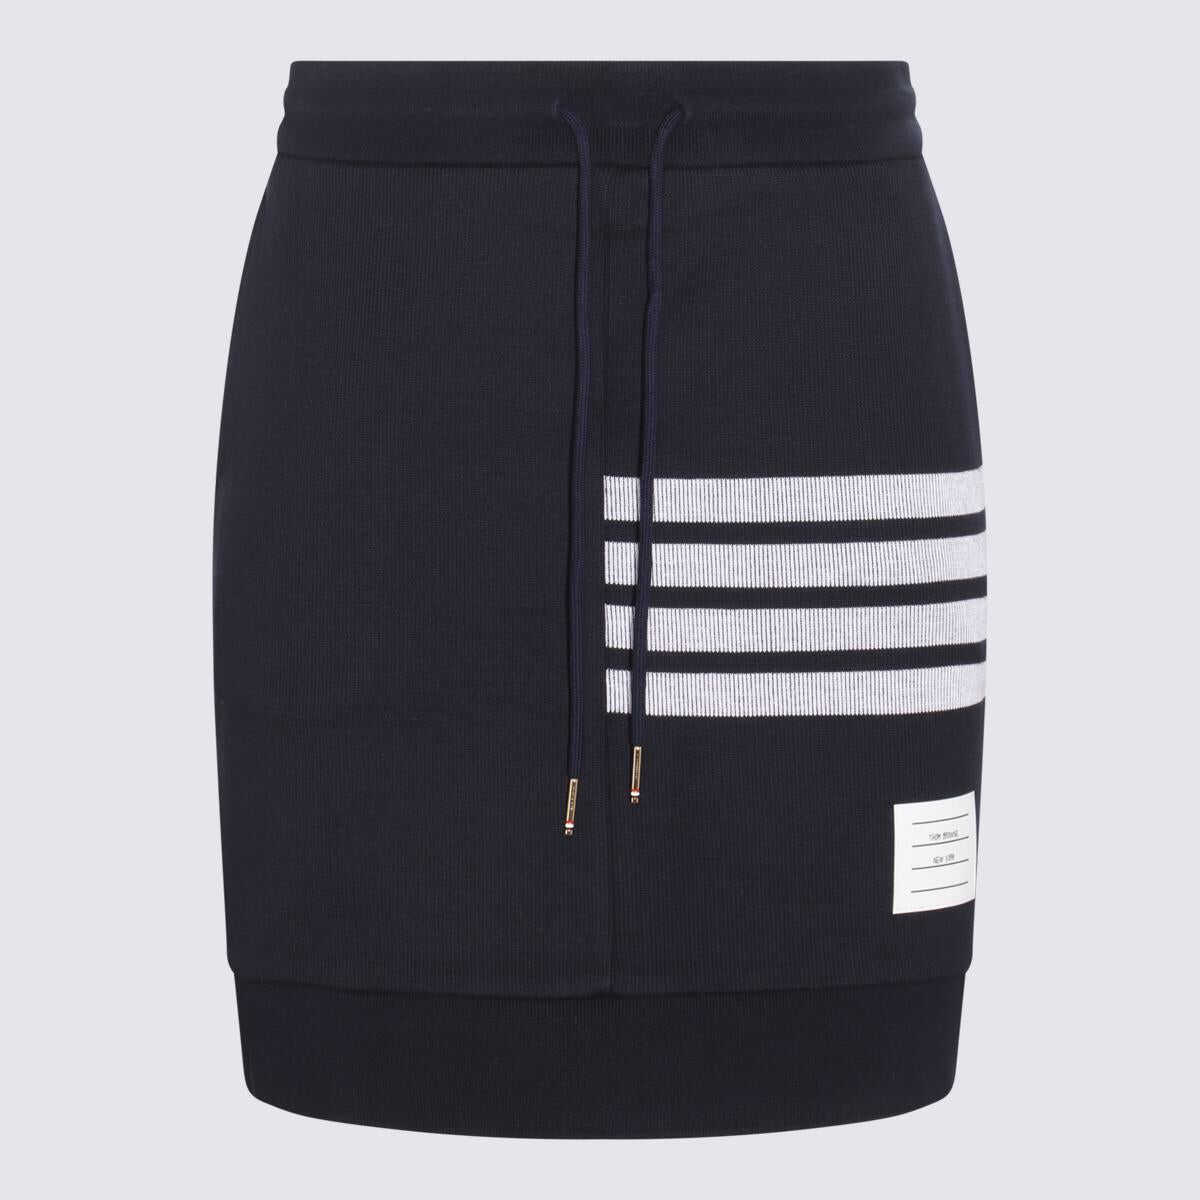 Poze Thom Browne THOM BROWNE NAVY BLUE AND WHITE COTTON SKIRT Blue b-mall.ro 